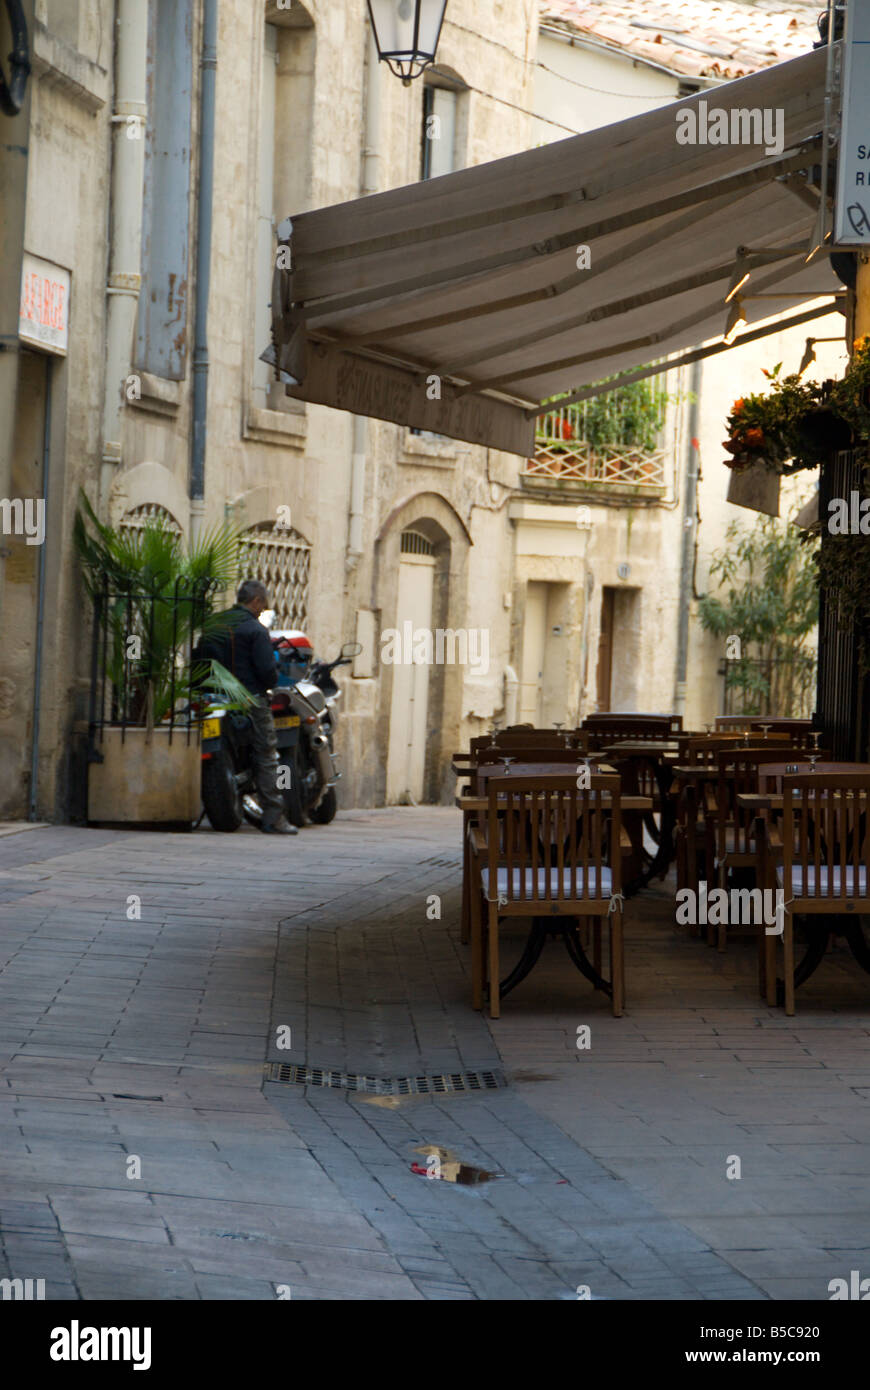 Outdoor café seating under an awning on an old street in Montpellier, France Stock Photo